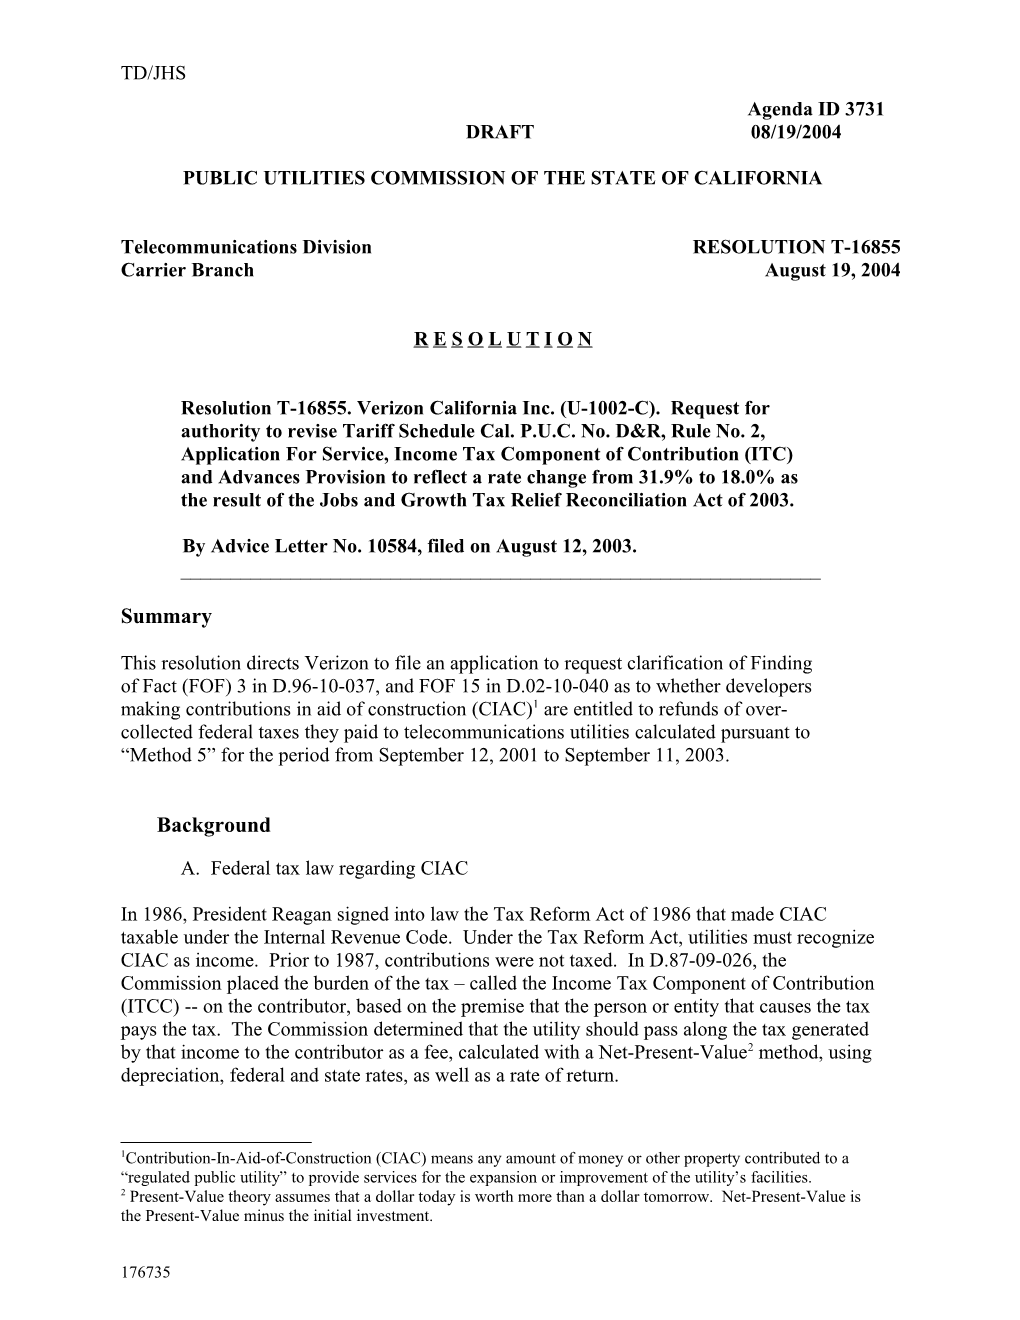 Public Utilities Commission of the State of California s107